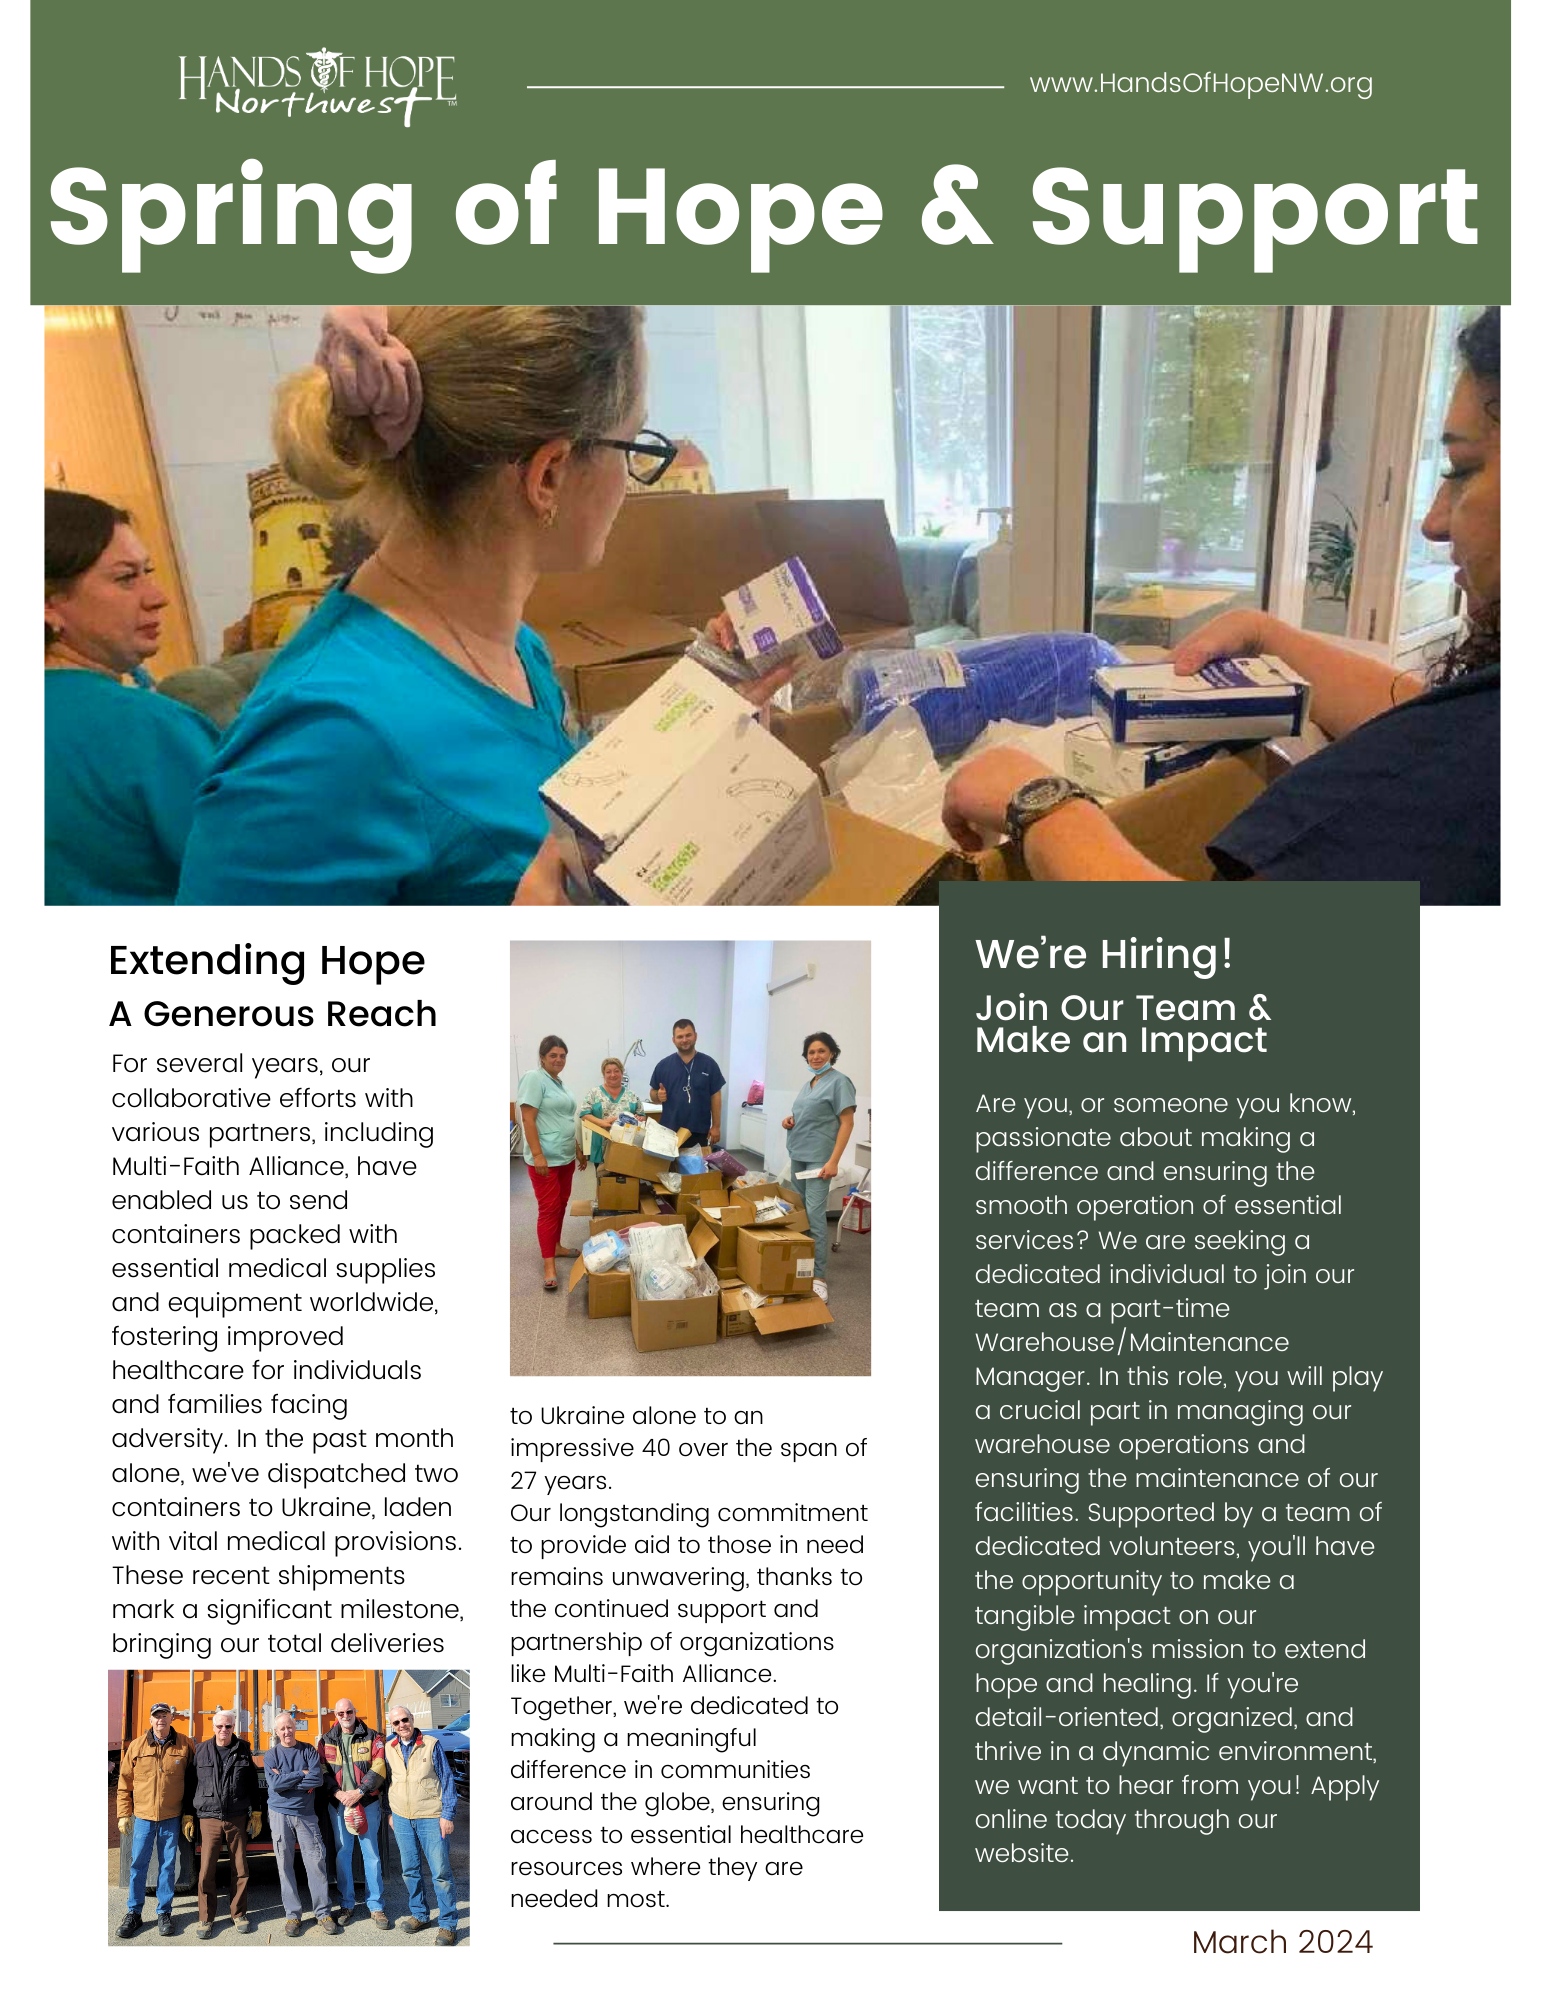 Cover of March 2024 newsletter